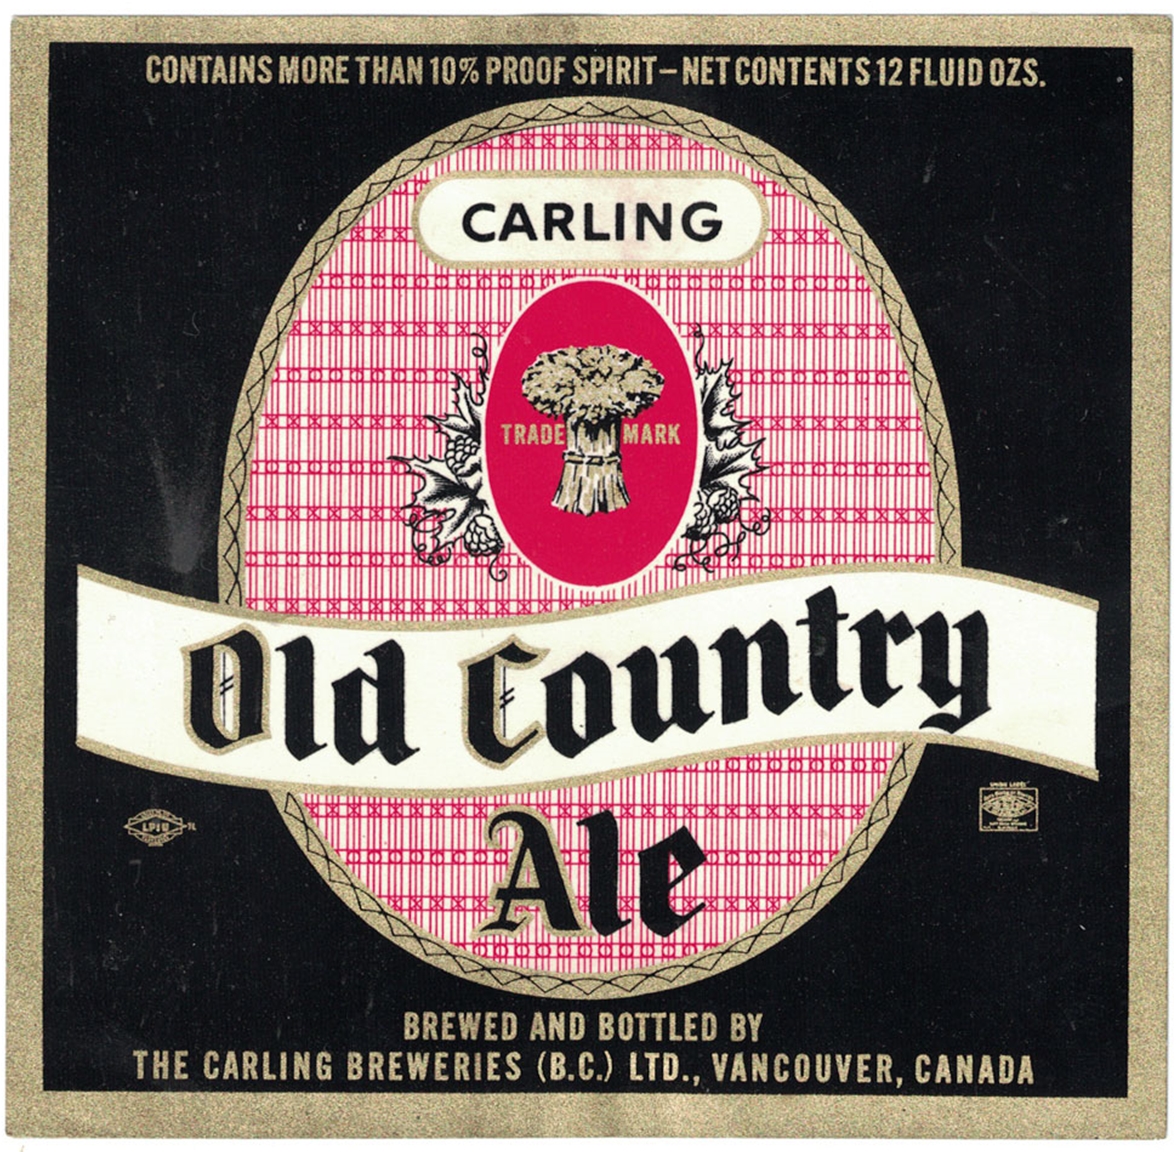 Carling Old Country Ale Label